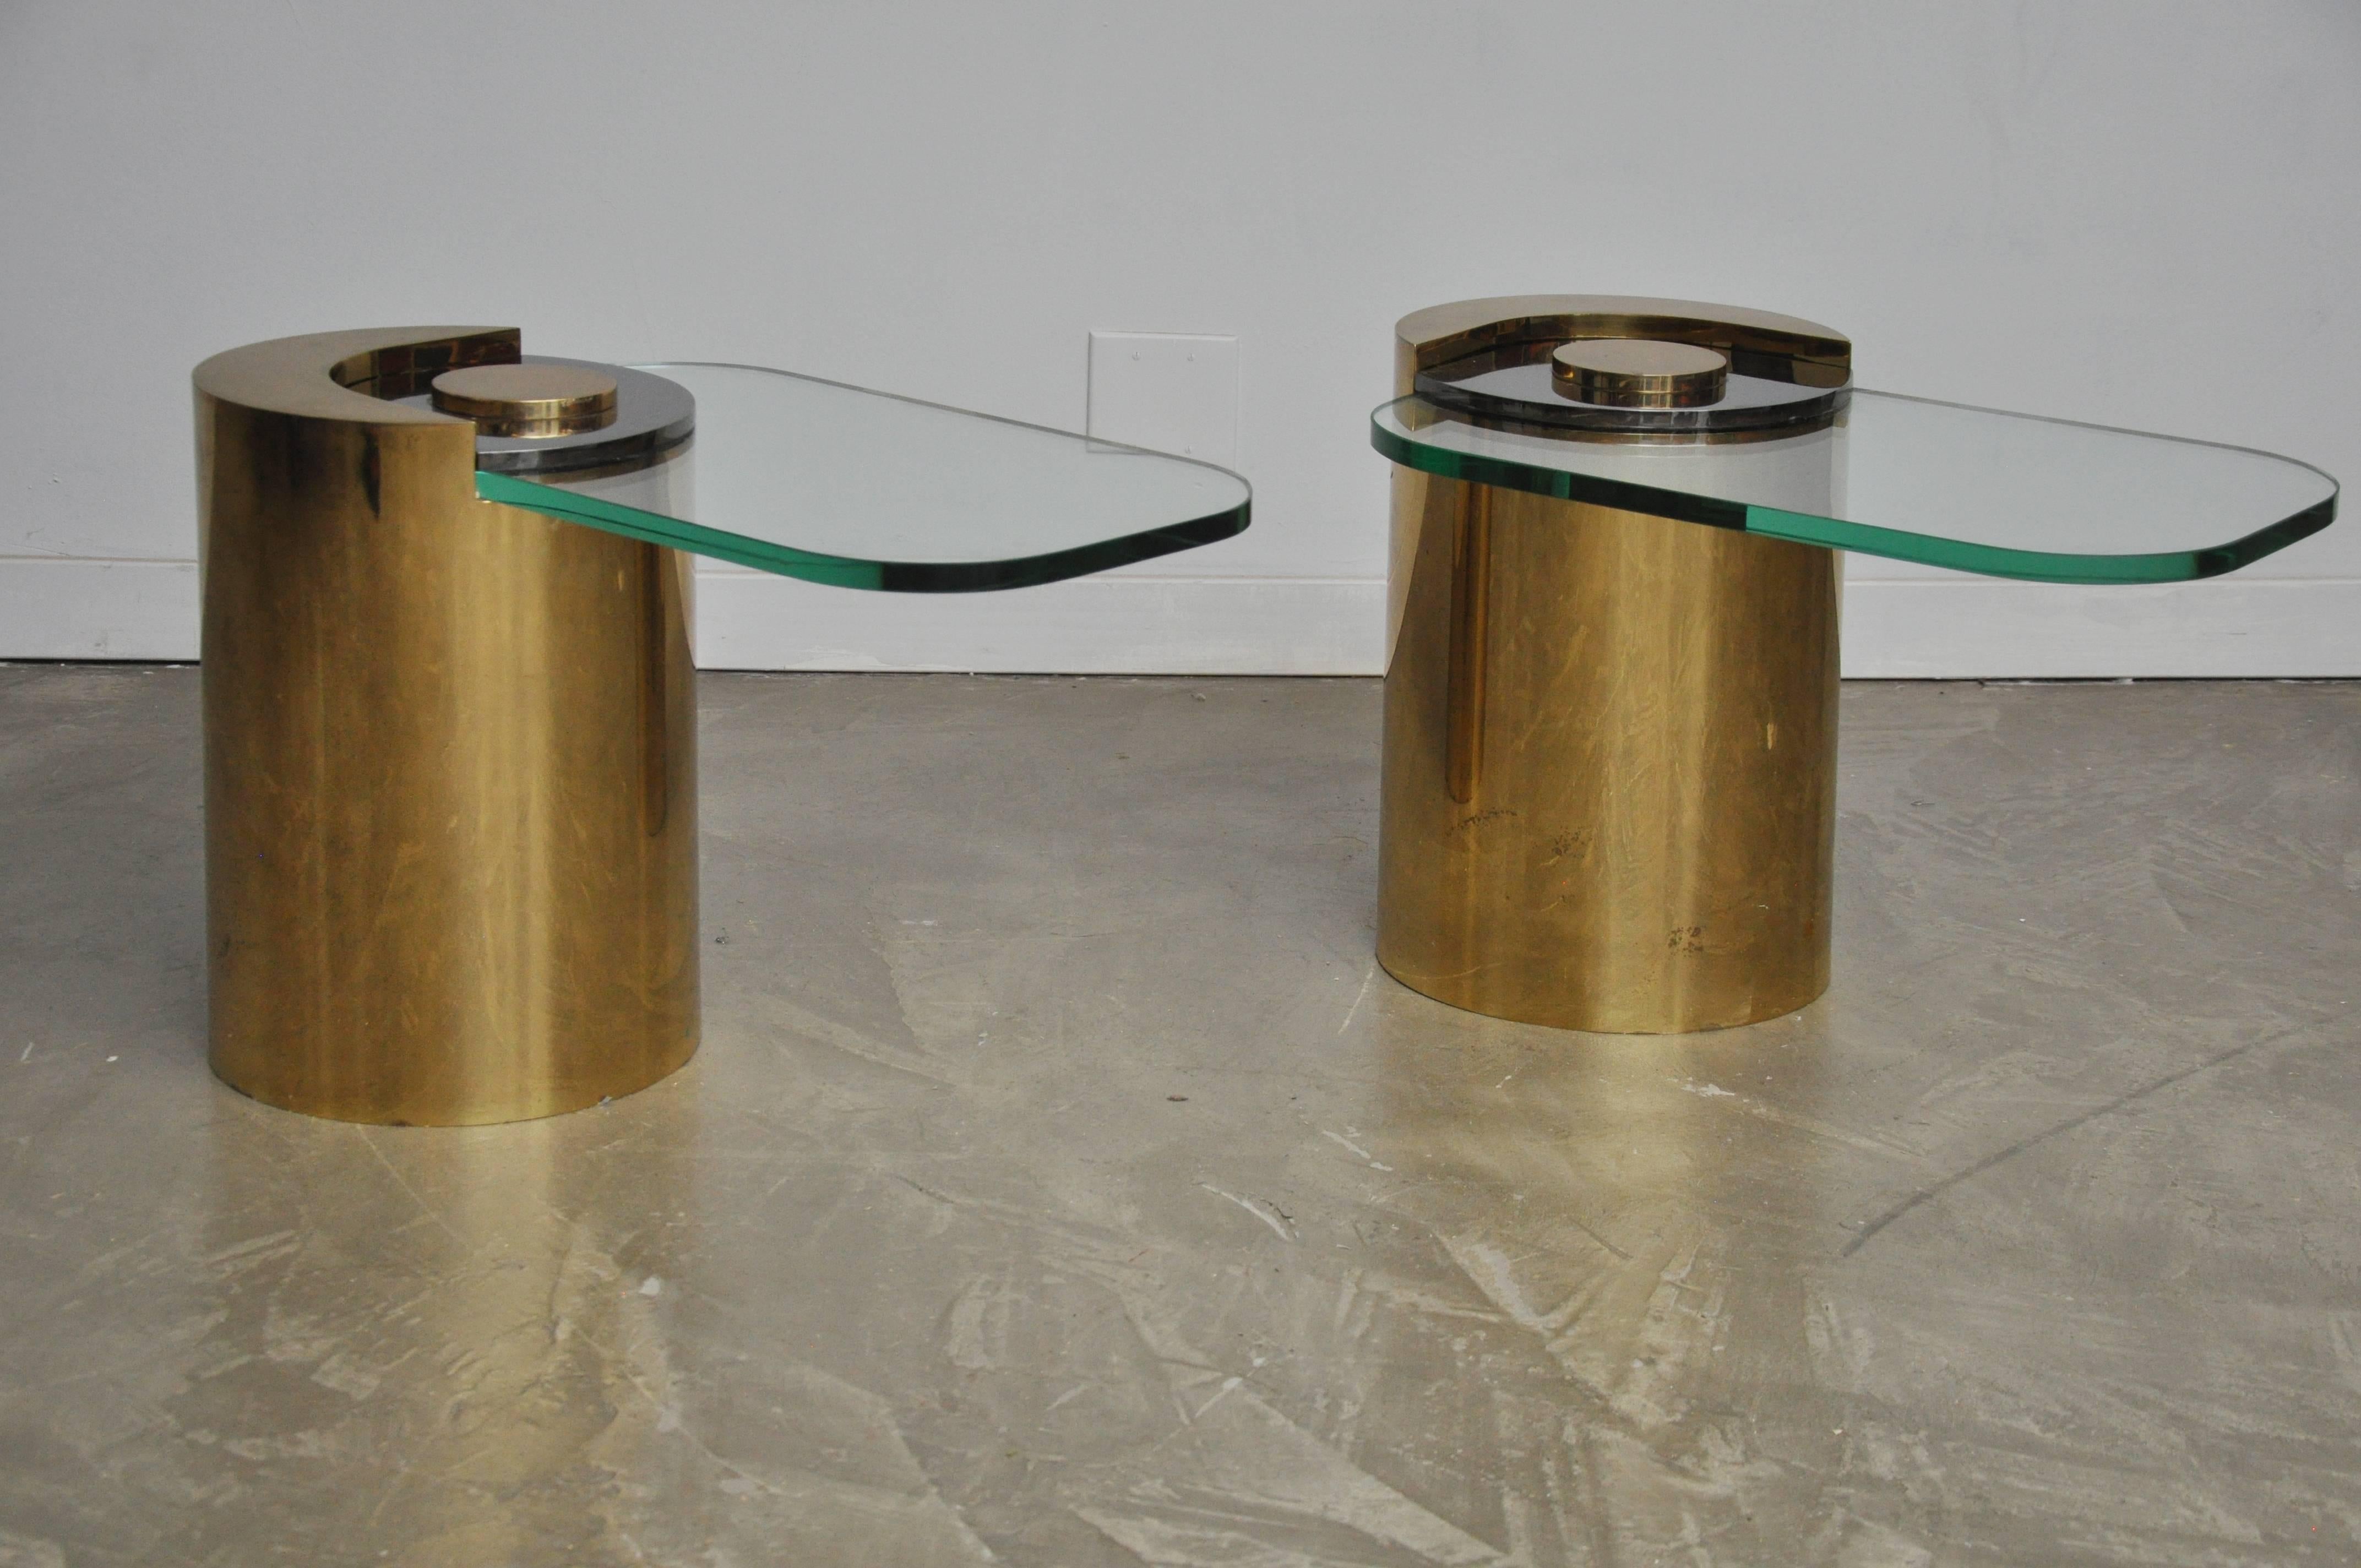 Pair of sculpture leg tables by Karl Springer. Brass bases with gun metal finish accent pieces holding cantilever glass in place. New glass, free of scratches. 